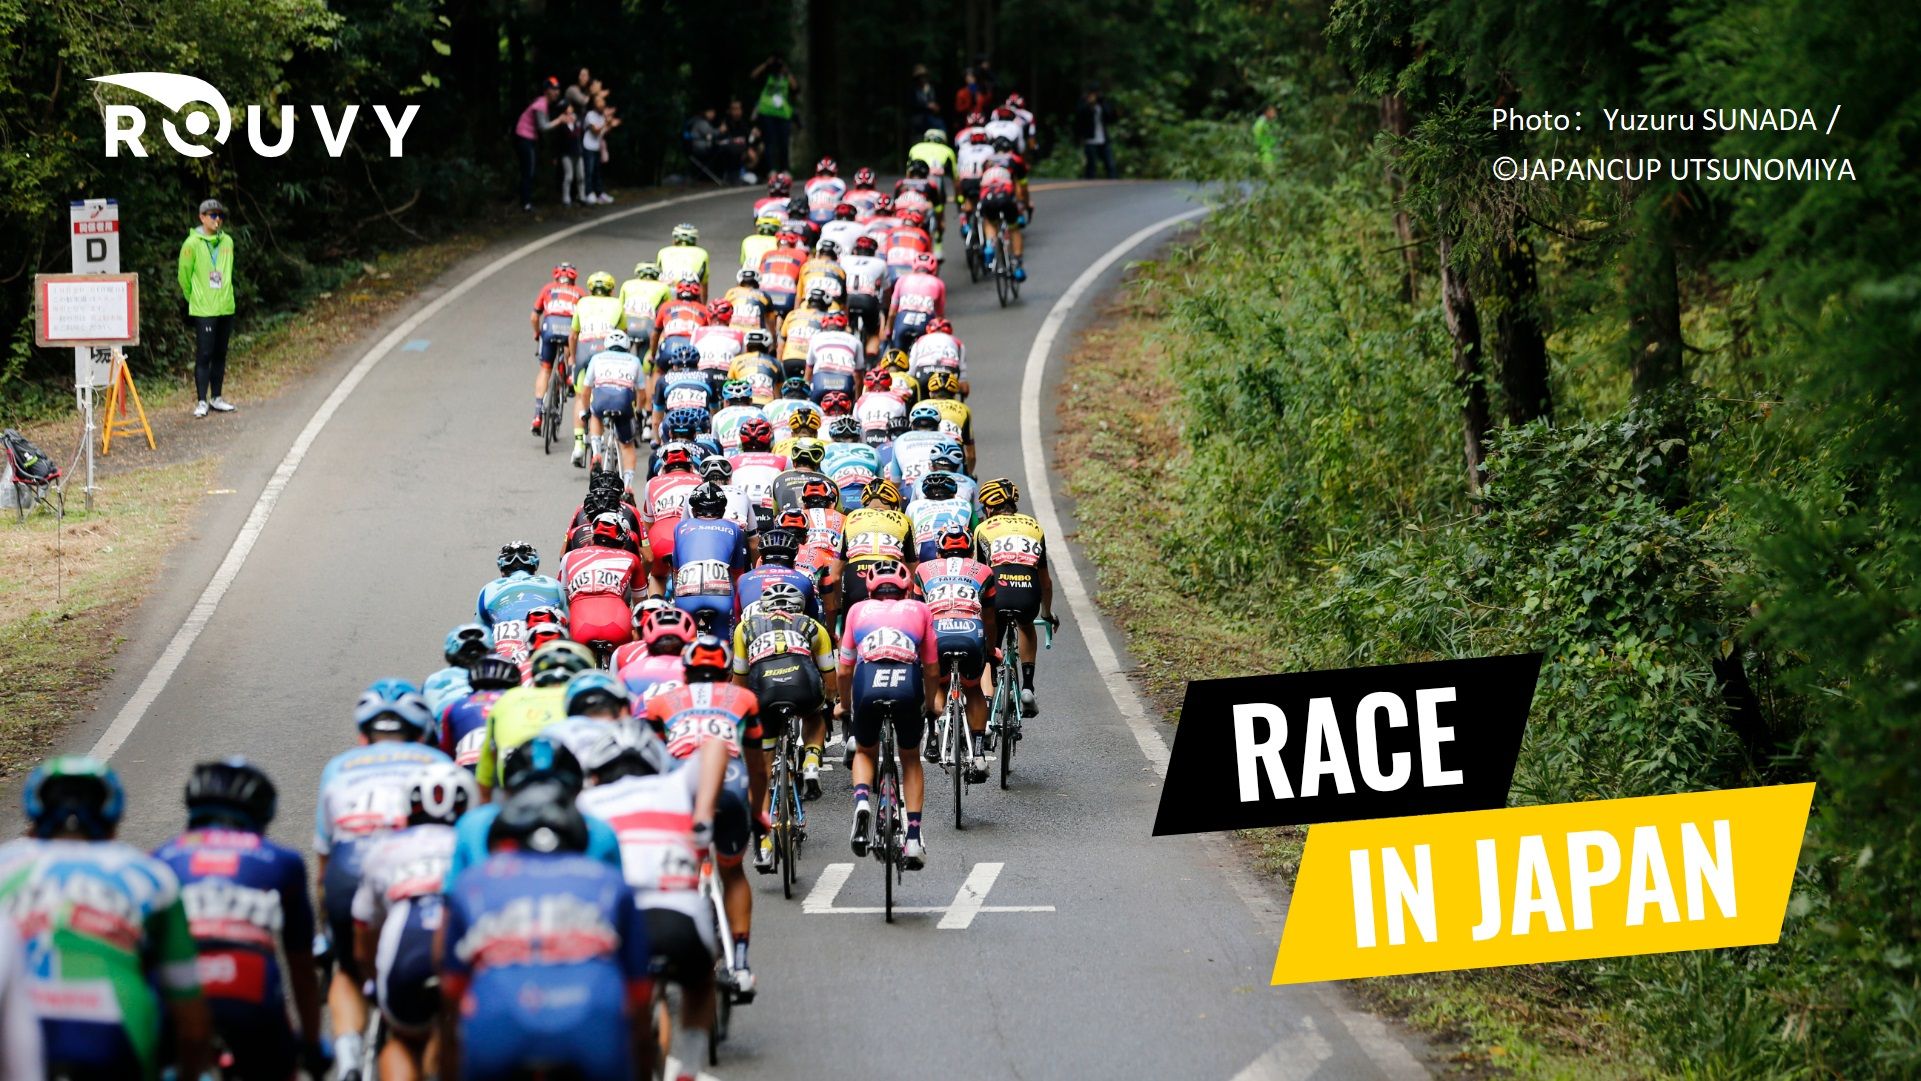 DIGITAL JAPAN CUP CYCLE ROAD RACE UTSUNOMIYA | Riders from UCI World and Pro Teams will race virtually on Oct 17th on ROUVY